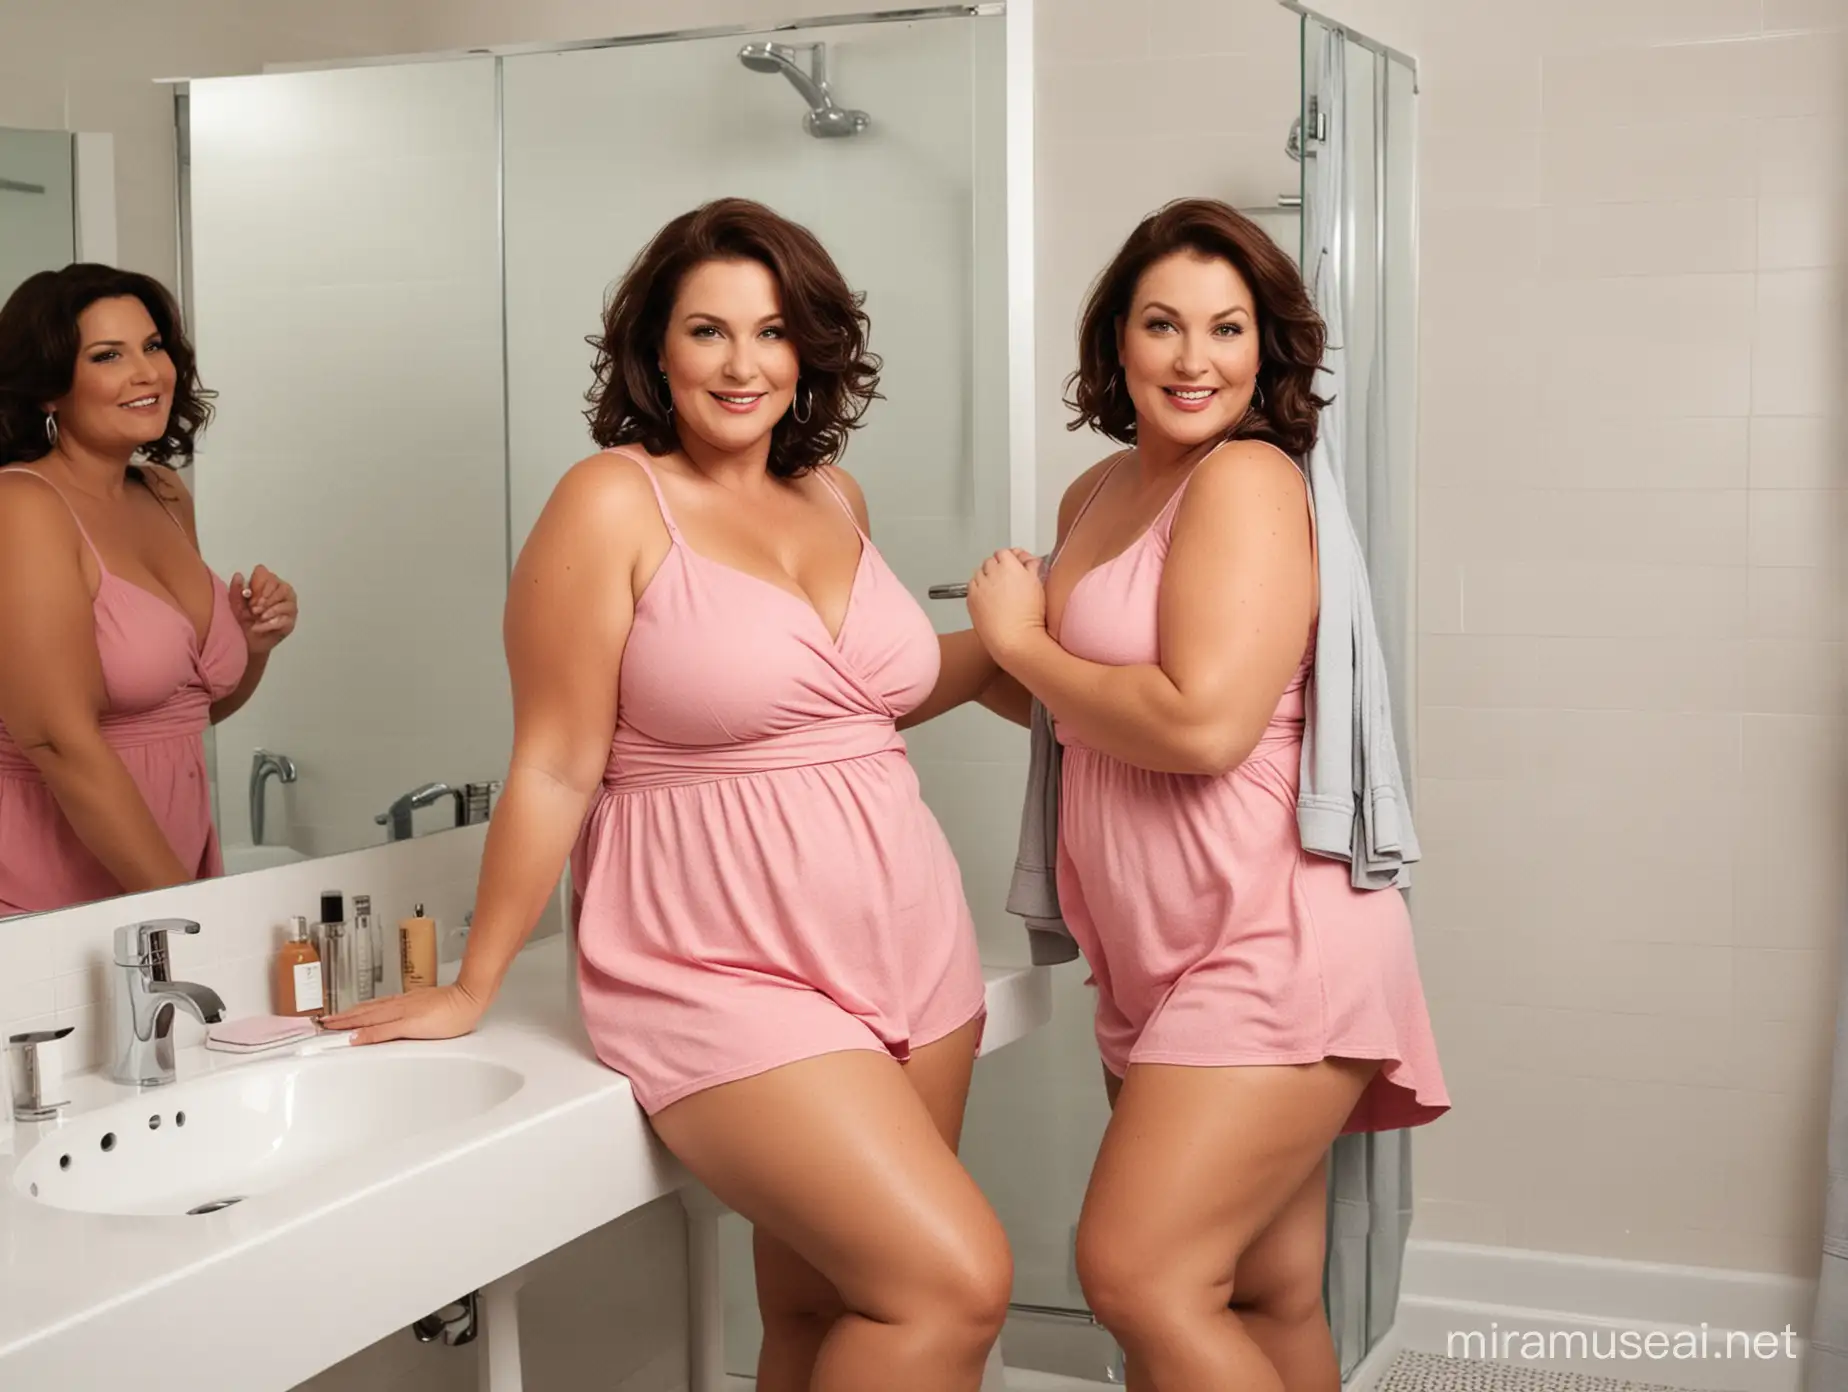 plus size gorgeous women in their 50s in a bathroom